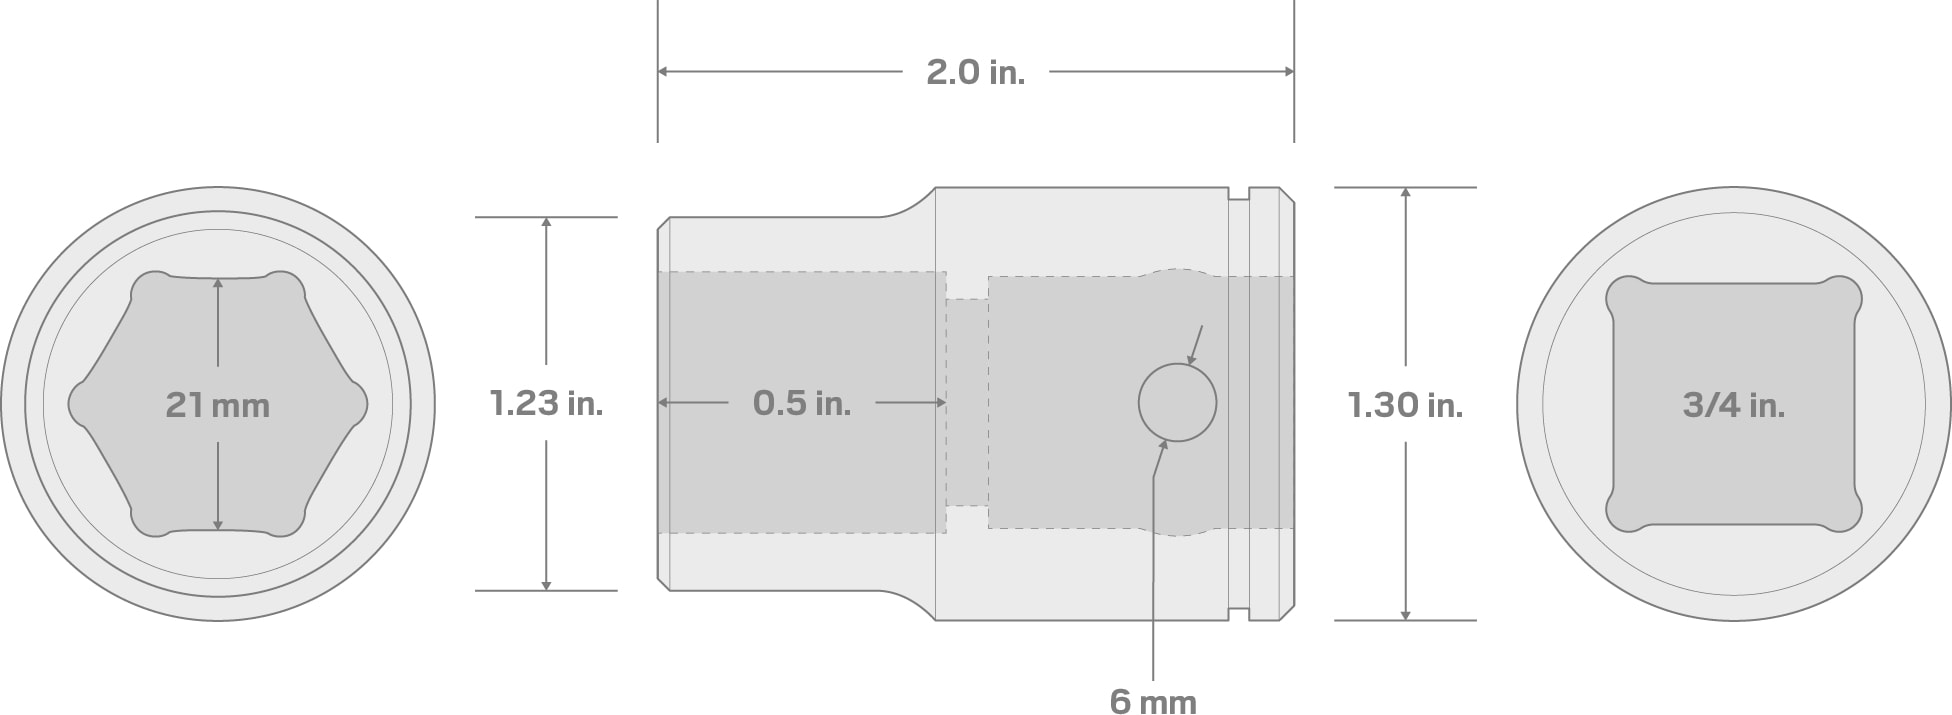 Specs for 3/4 Inch Drive x 21 mm 6-Point Socket